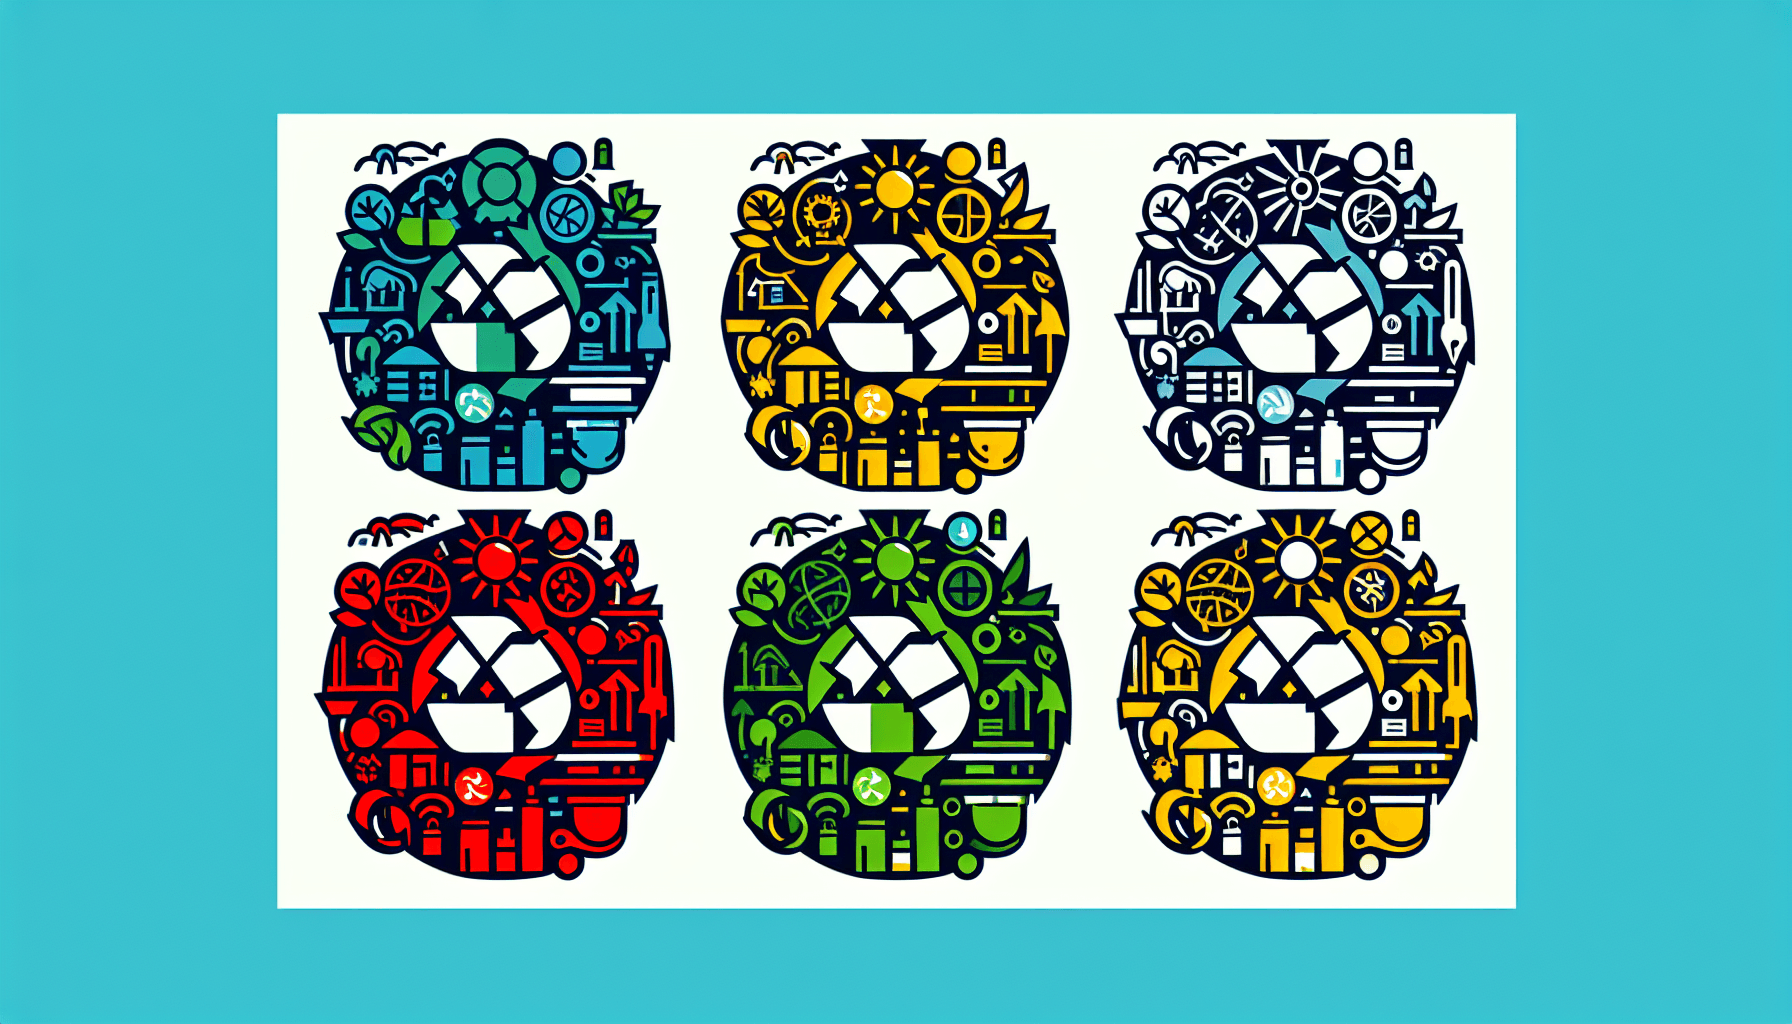 Circular economy in flat illustration style and white background, red #f47574, green #88c7a8, yellow #fcc44b, and blue #645bc8 colors.